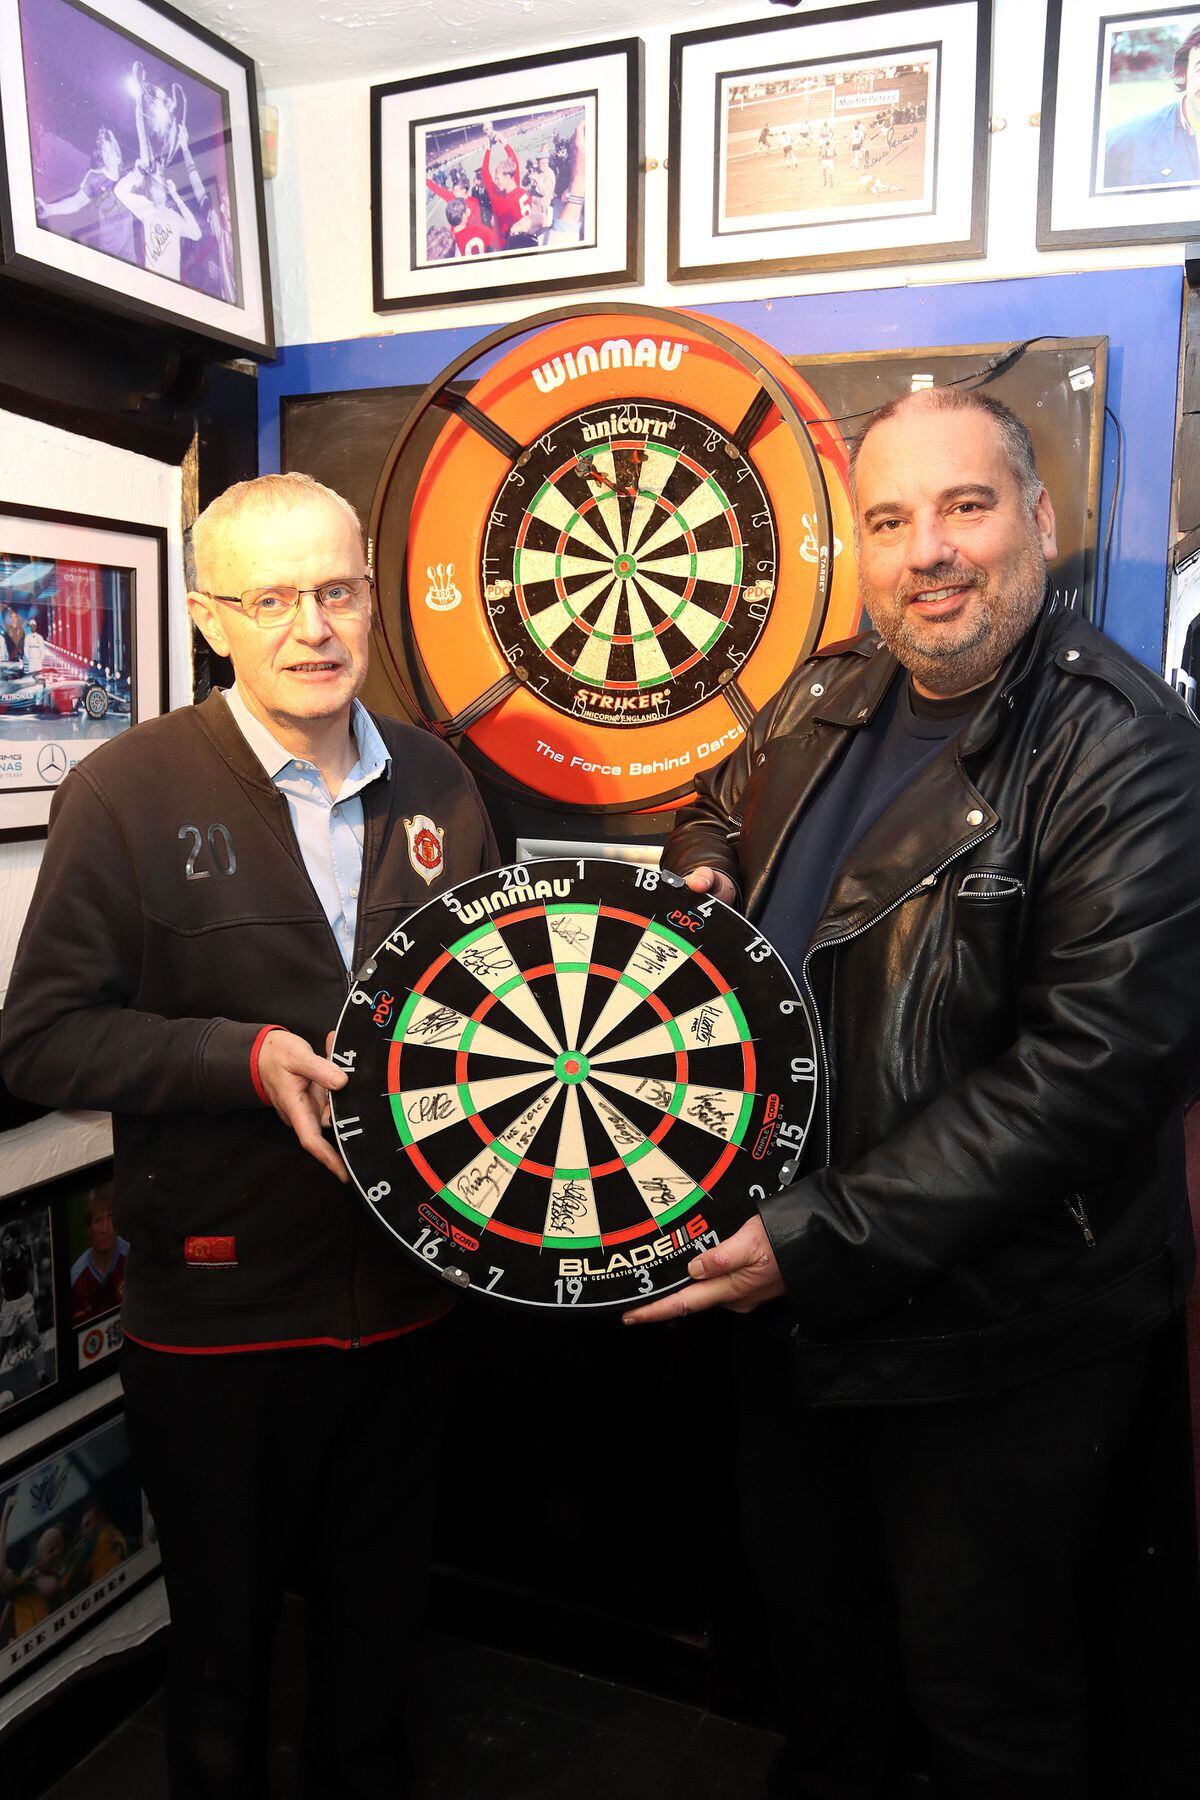 The event on December 11 will bring two of the best in the darting world to the Britannia Sports Bar